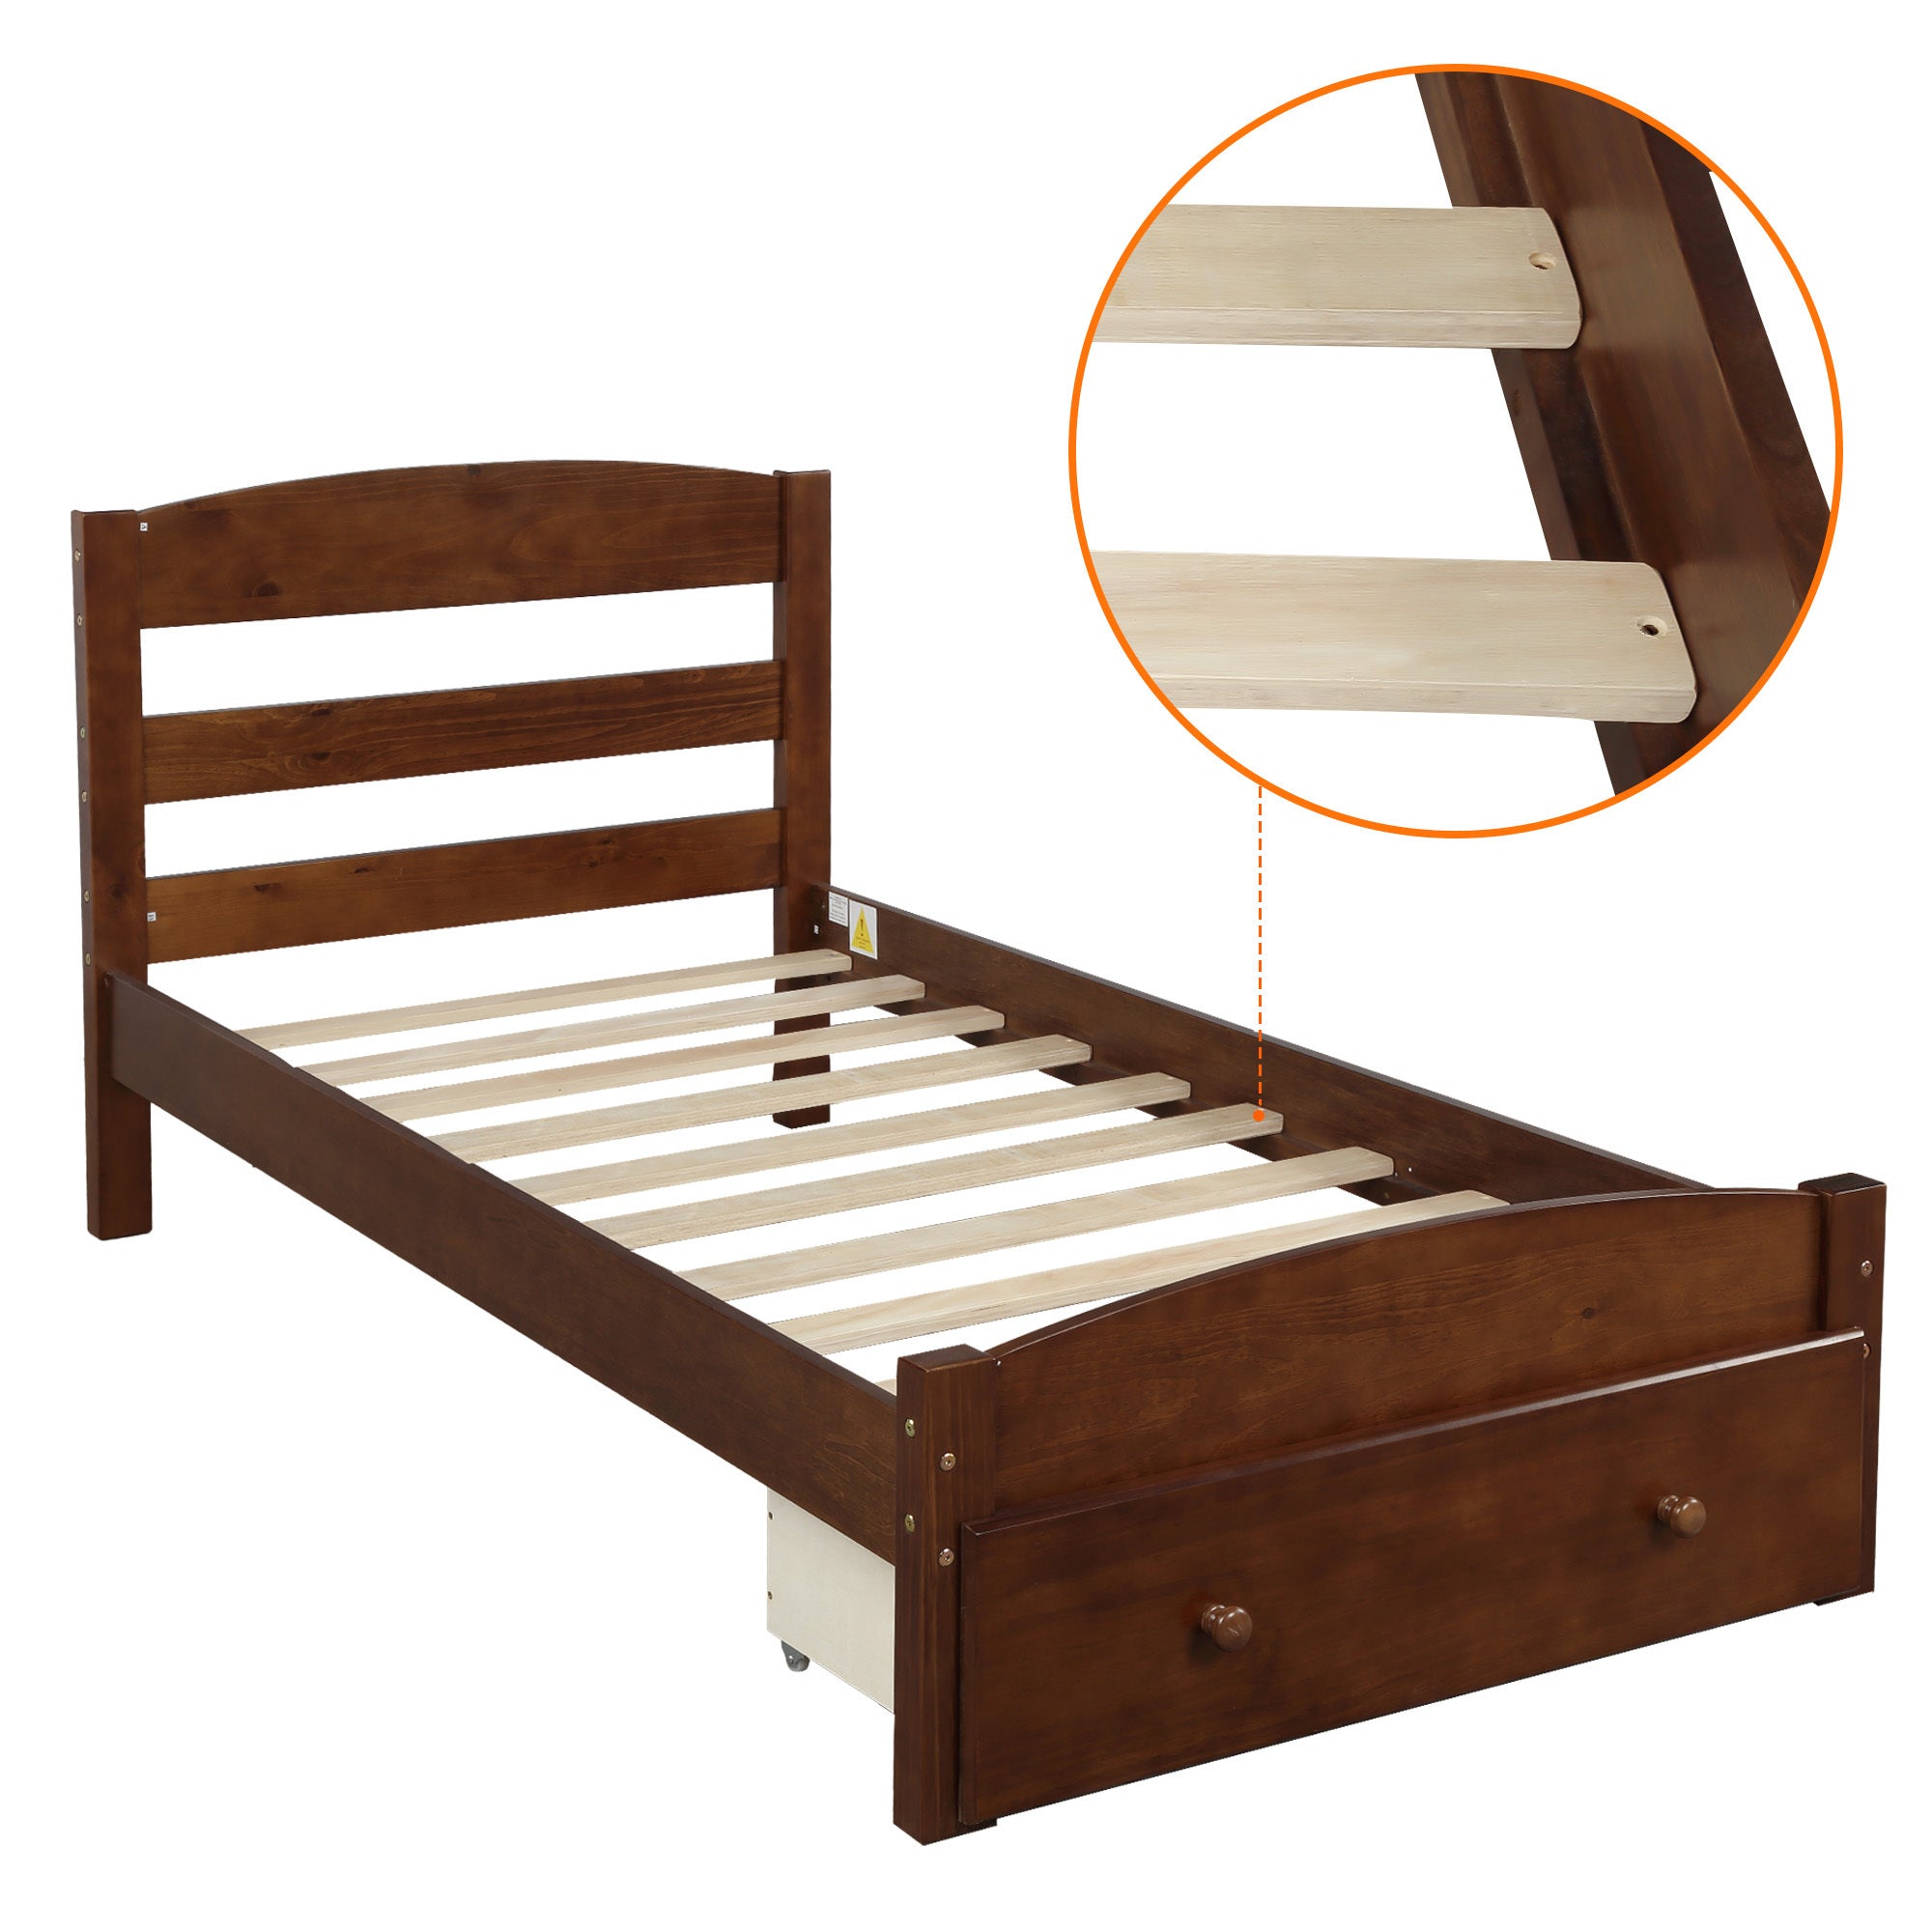 Walnut Twin Platform Bed Frame with Storage Drawer - Wood Slat Support, No Box Spring Required